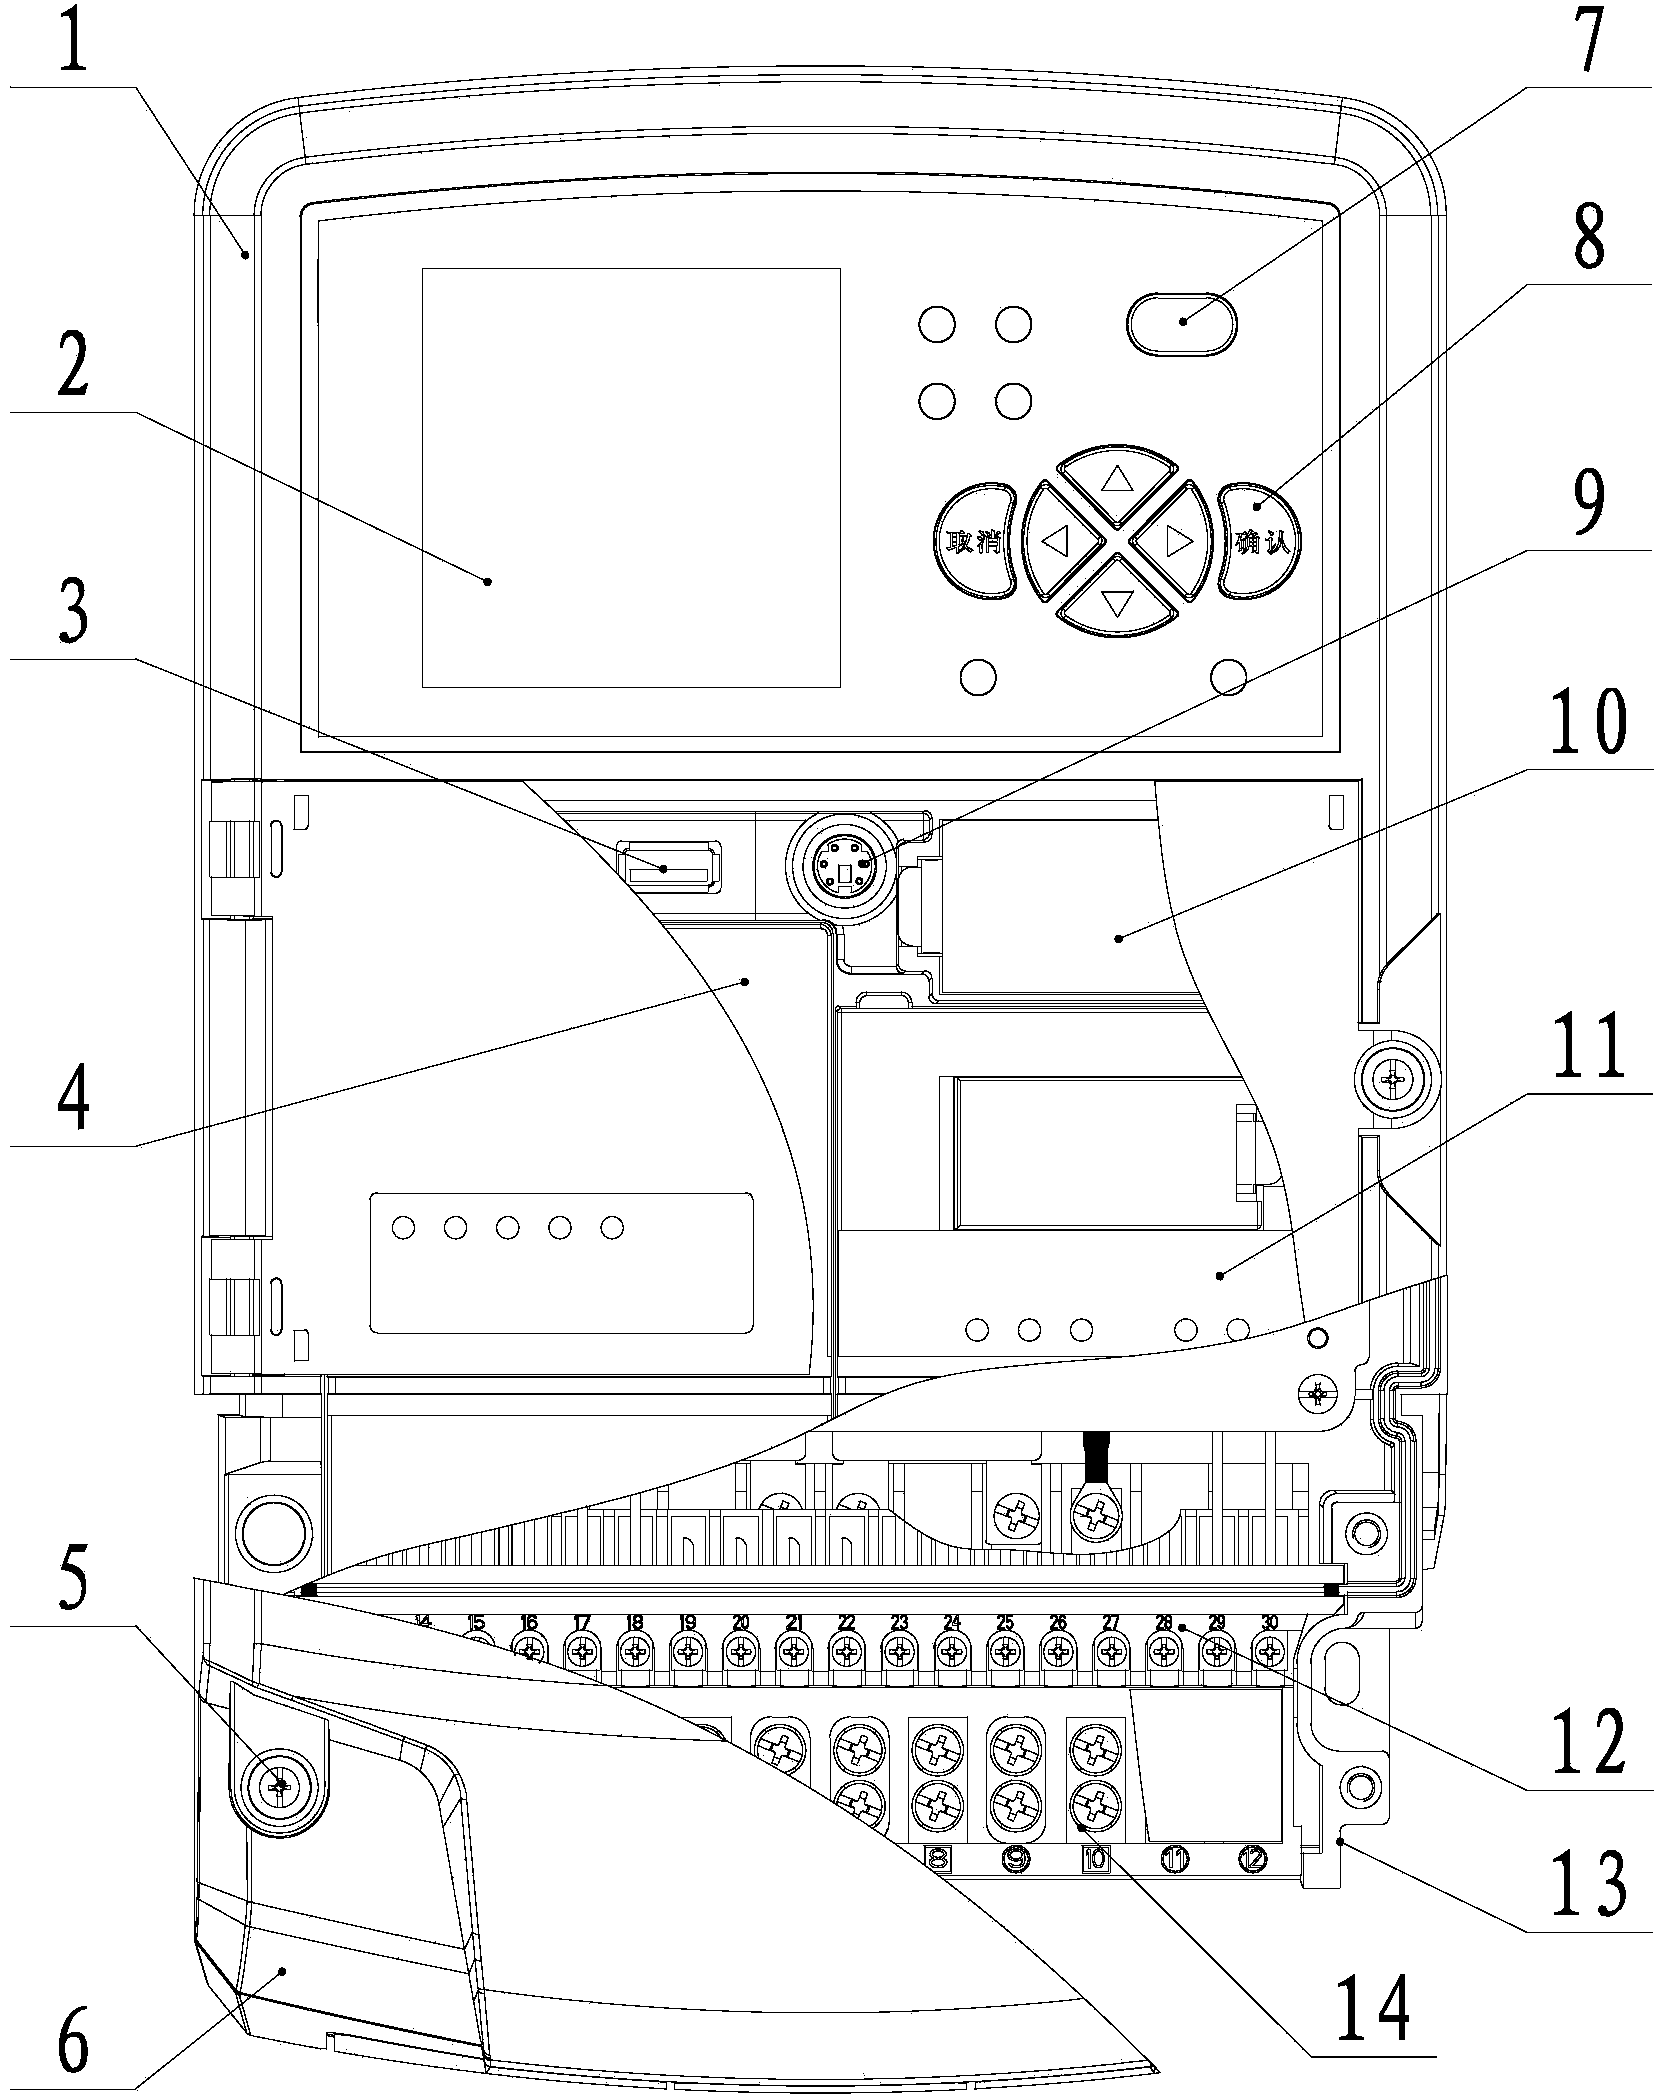 Automatic production line device checking system applied to acquisition terminal and automatic production line device checking method applied to acquisition terminal